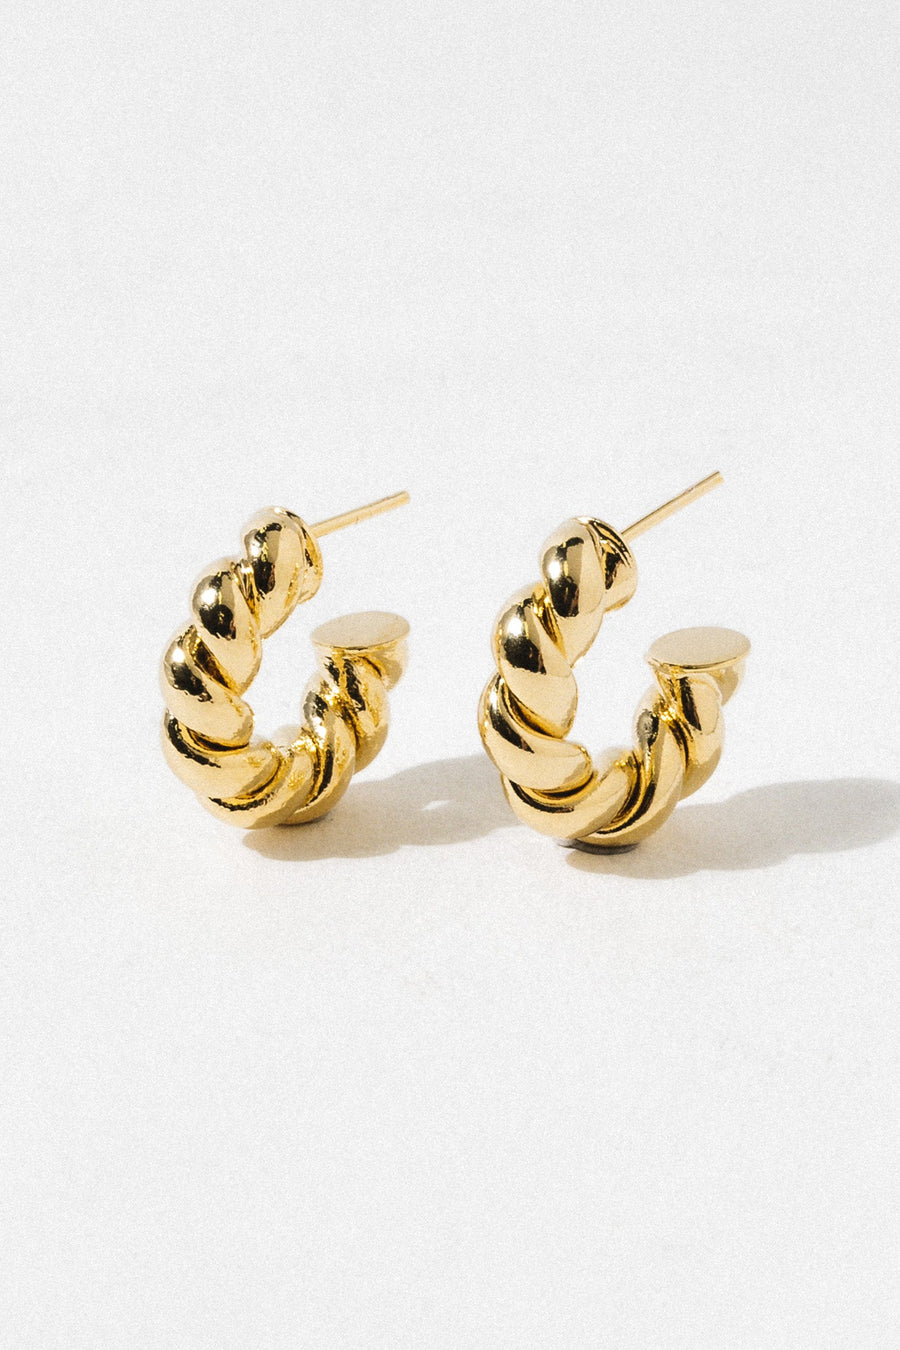 Dona Italia Jewelry Gold / Small Twisted Sister Hoops